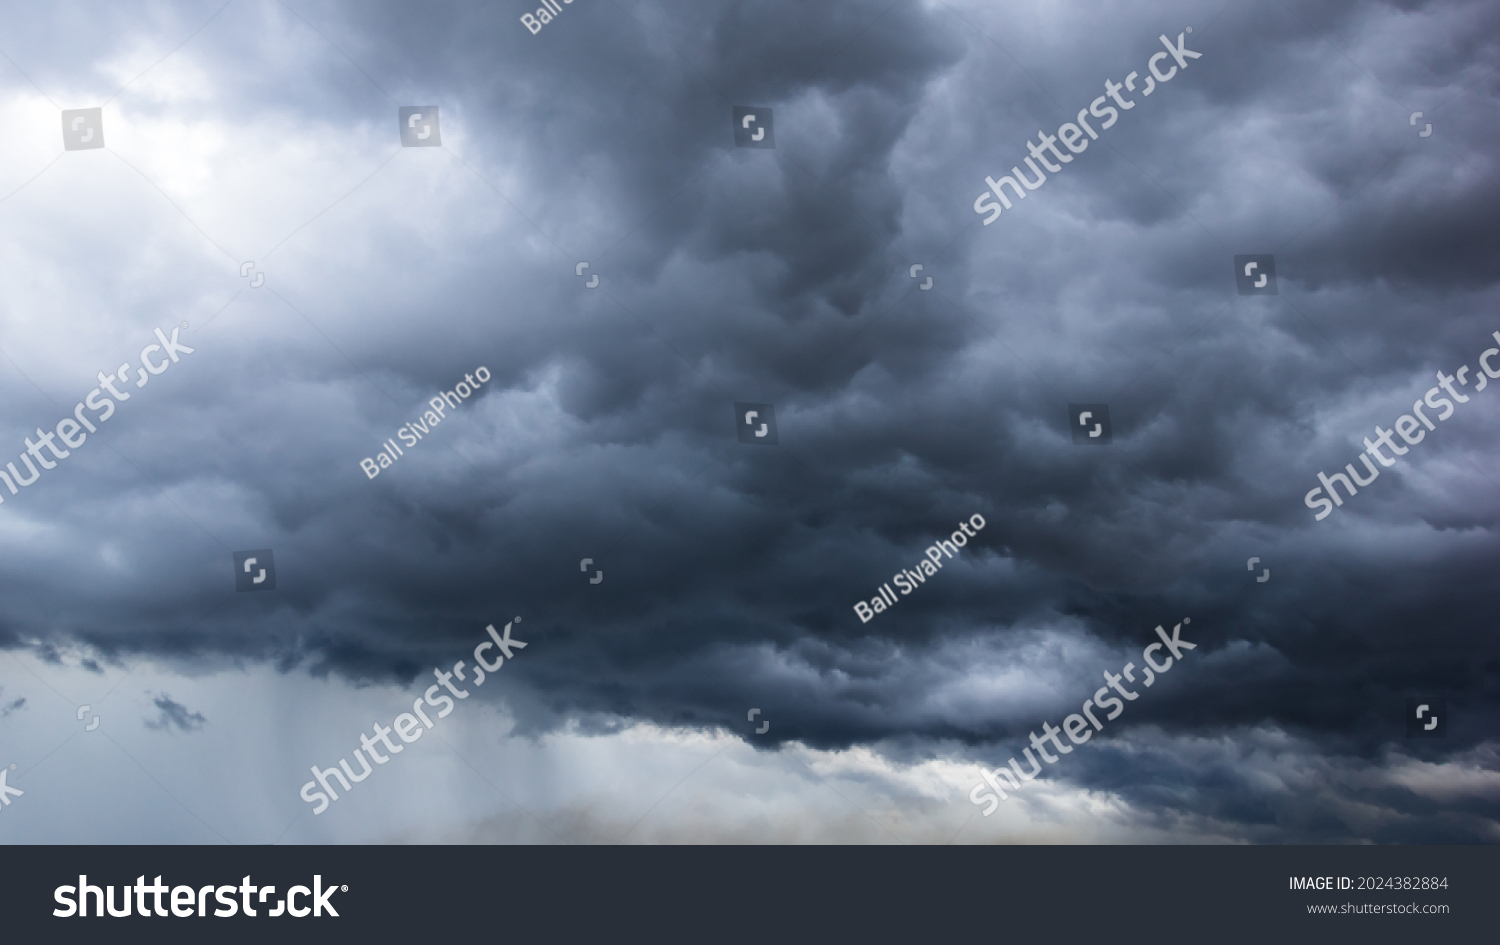 The dark sky with heavy clouds converging and a violent storm before the rain.Bad weather sky. #2024382884